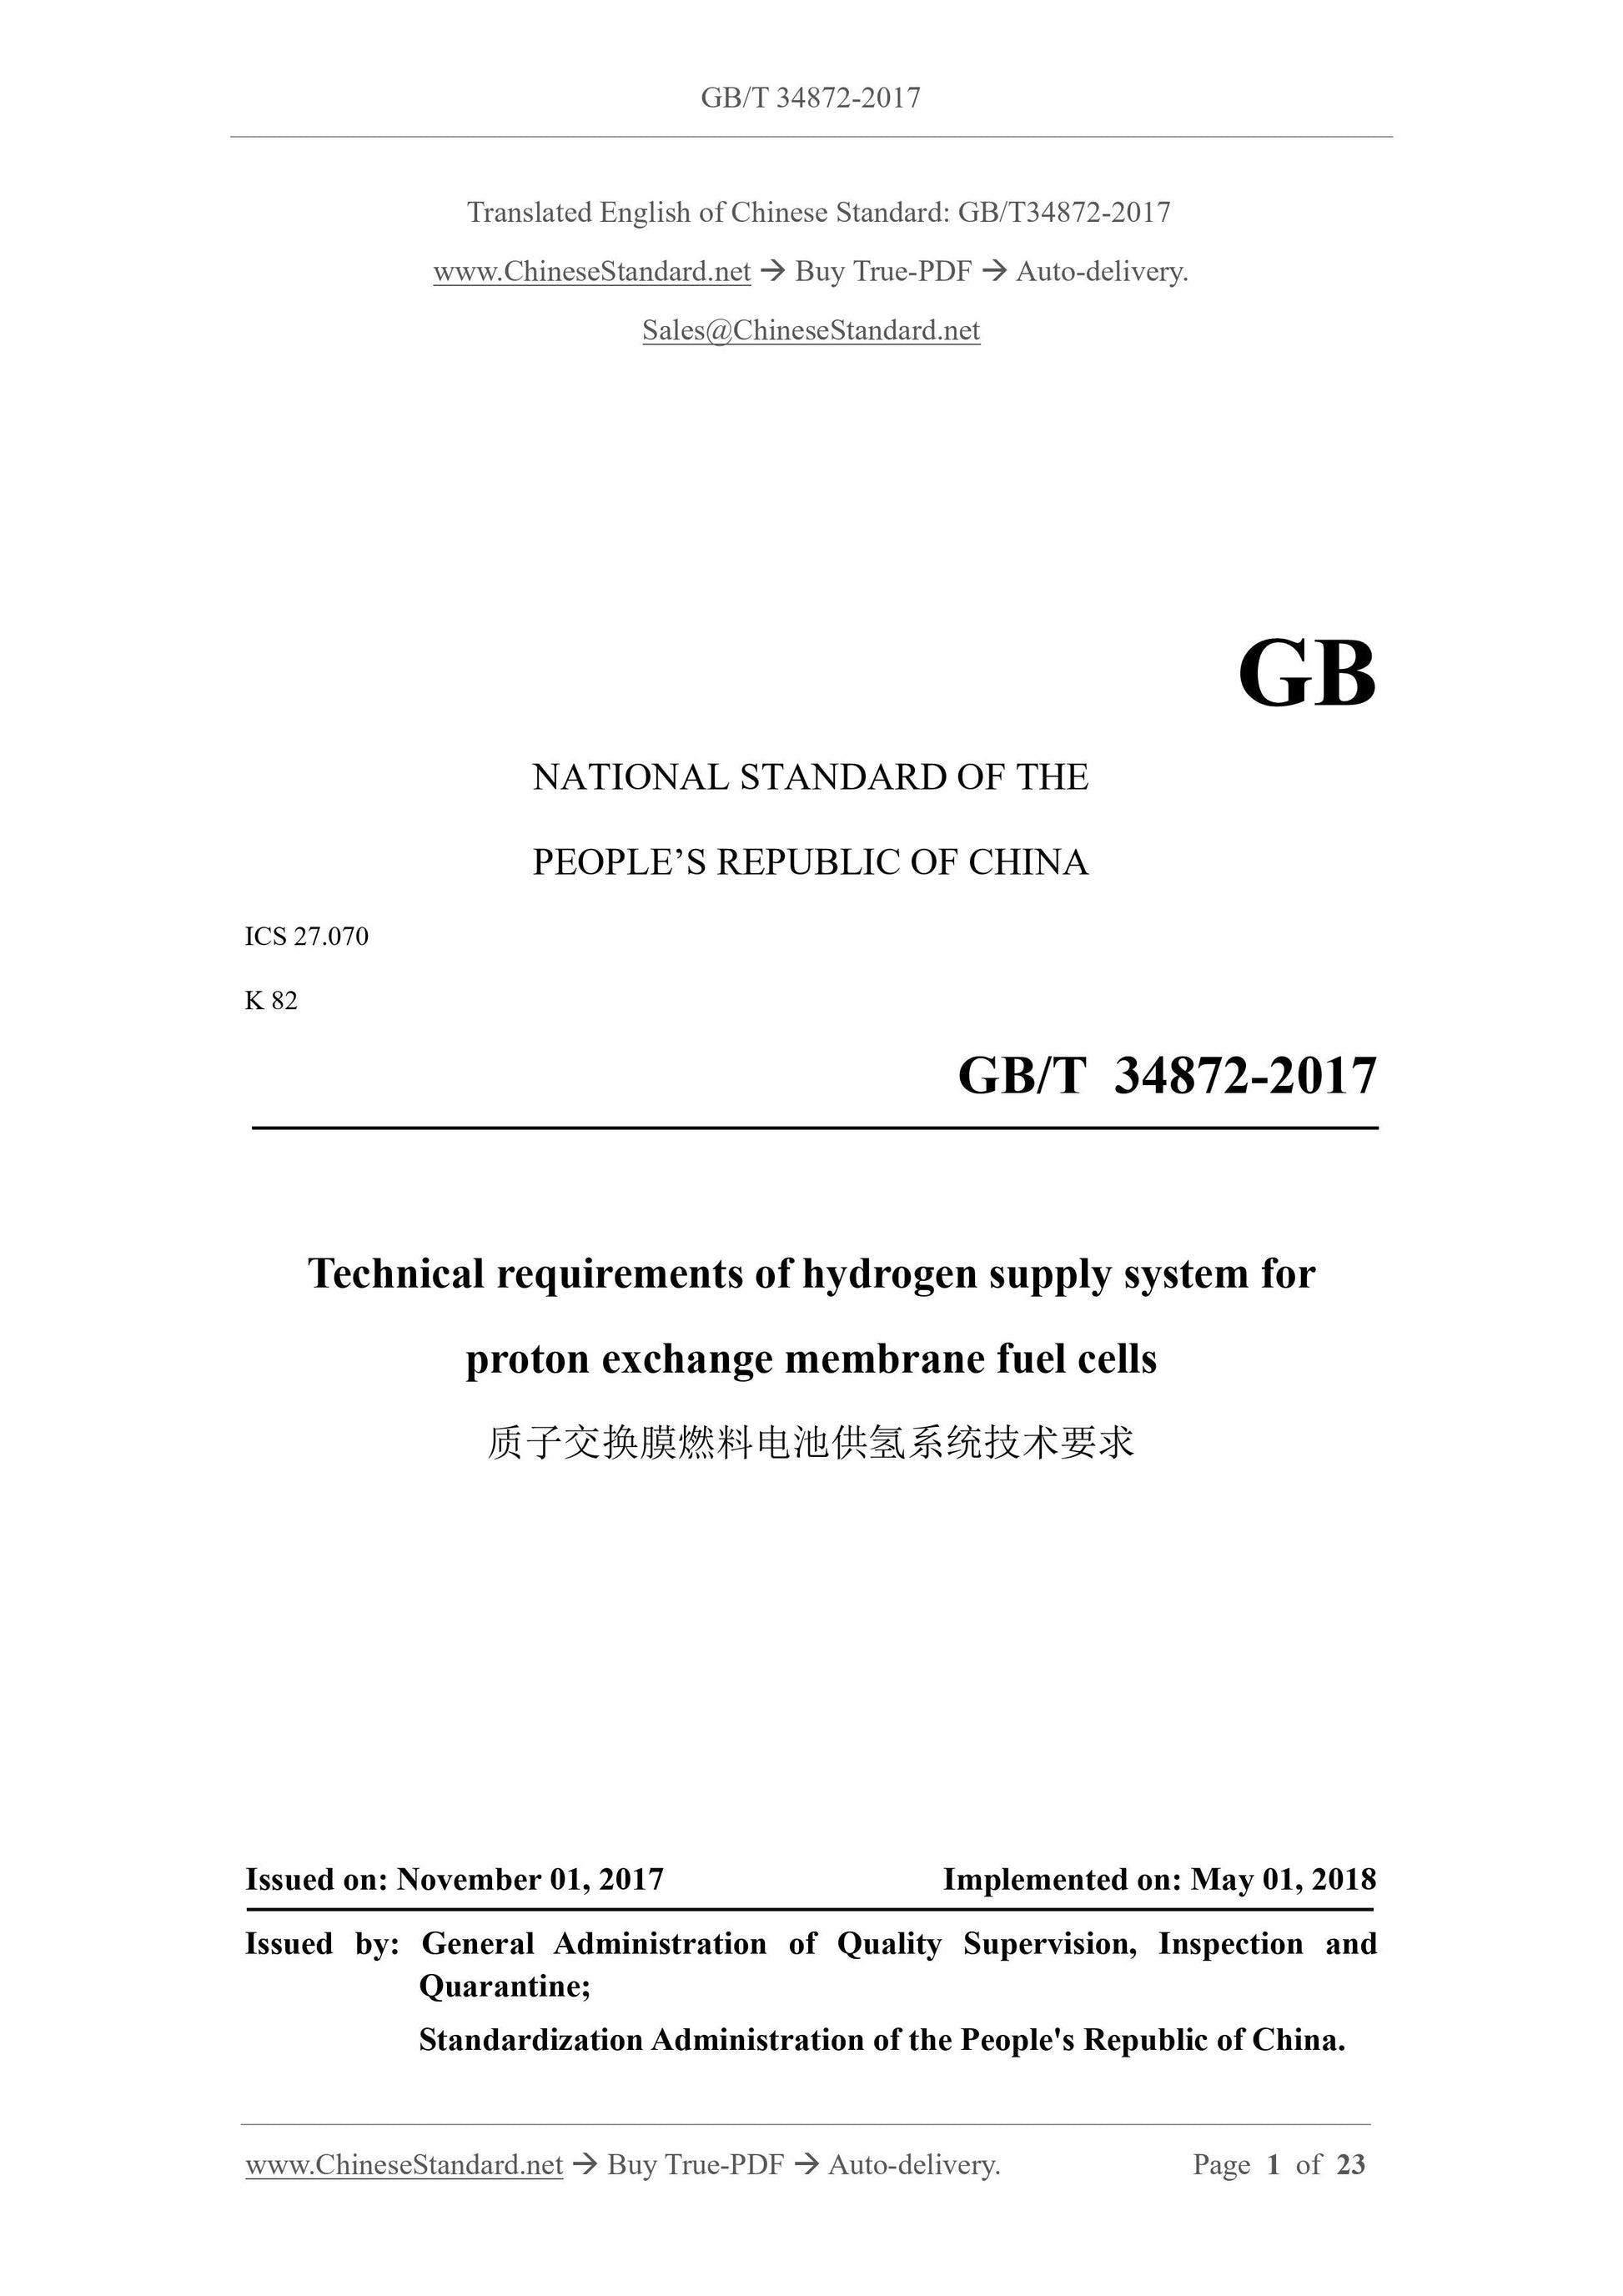 GB/T 34872-2017 Page 1